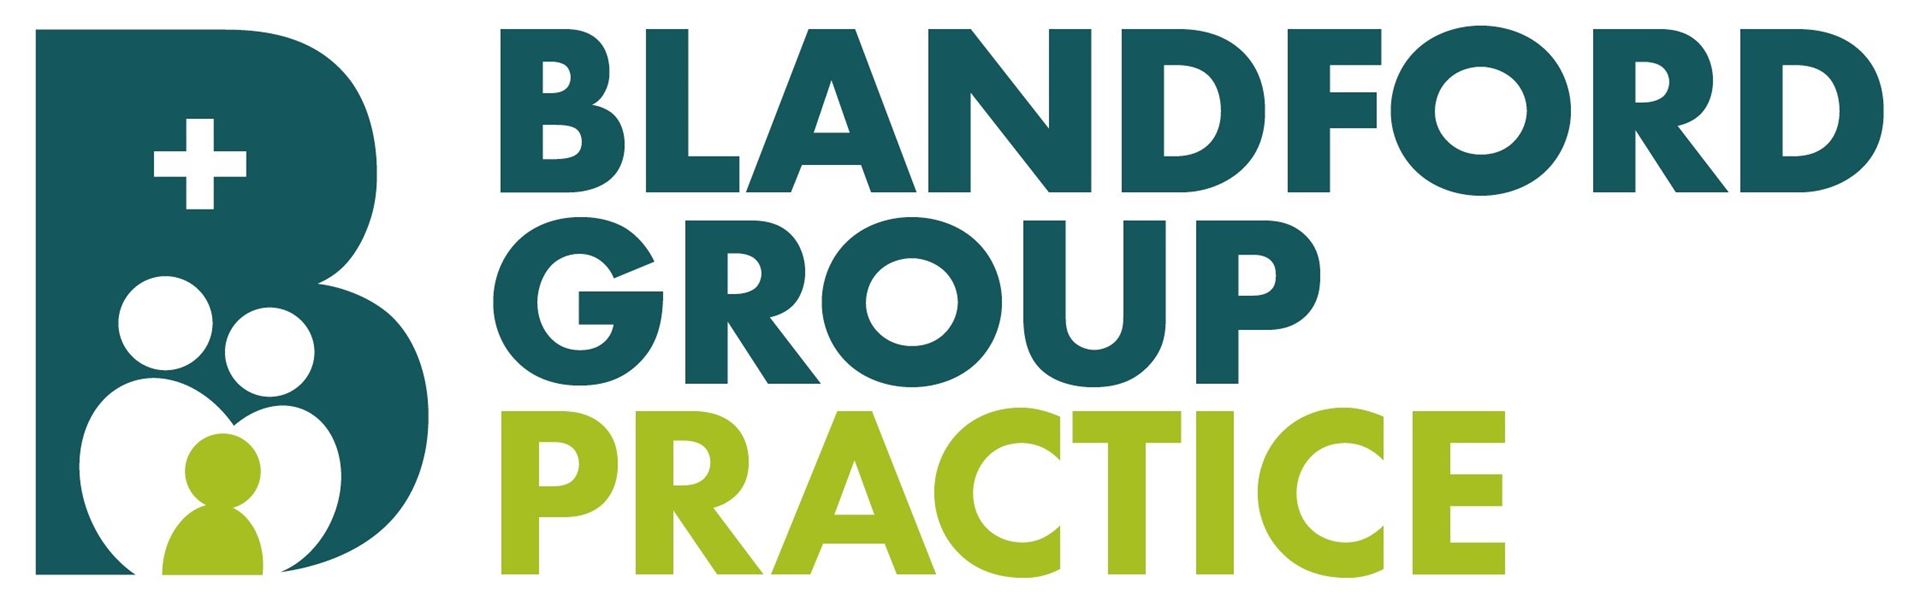 The Blandford Group Practice Logo